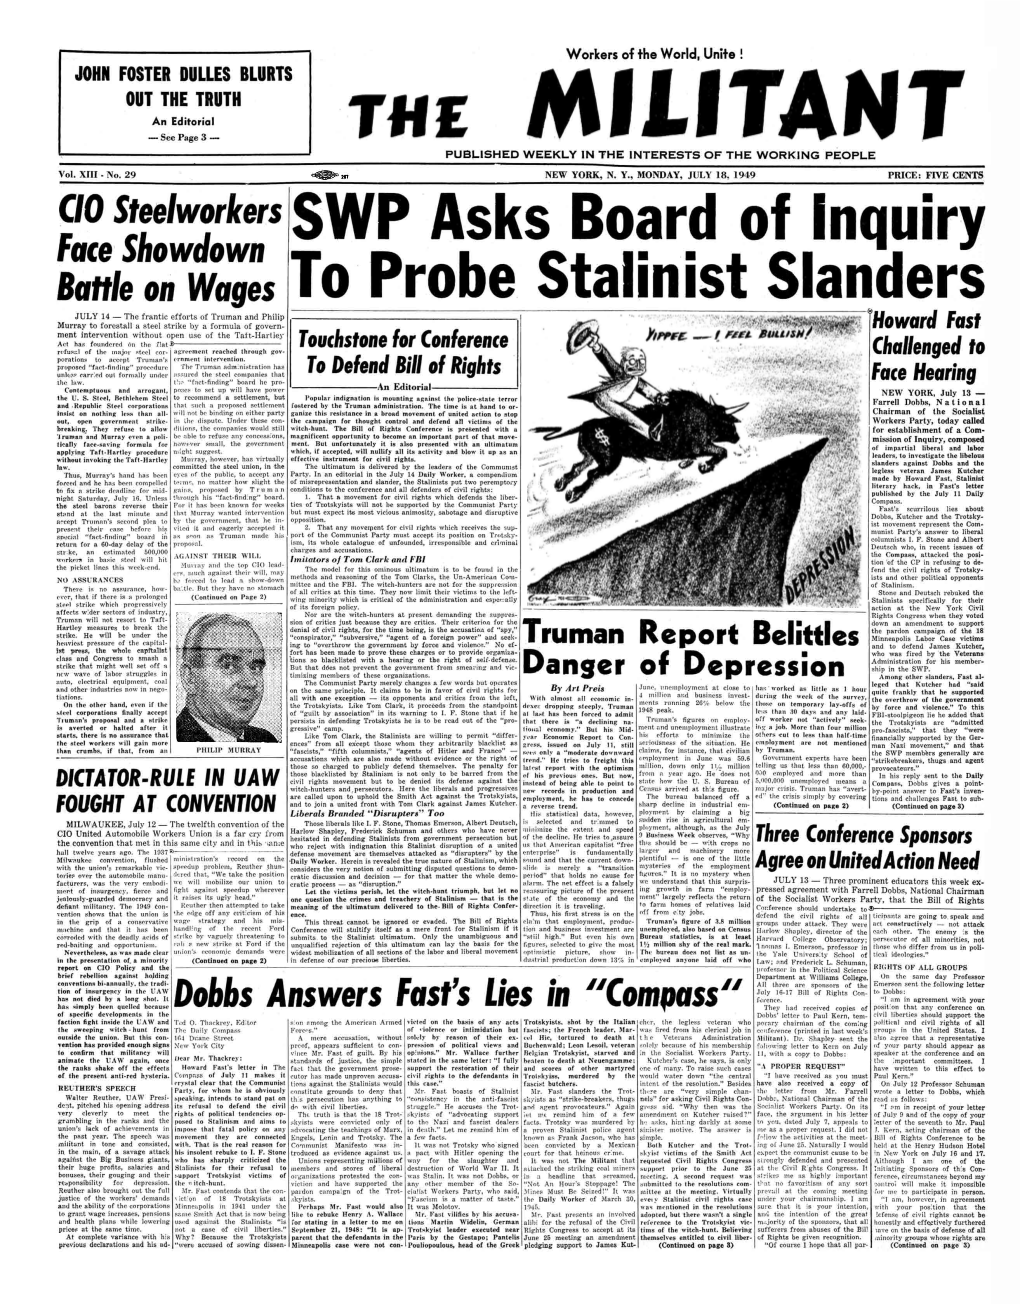 SWP Asks Board of Inquiry to Probe Stalinist Slanders